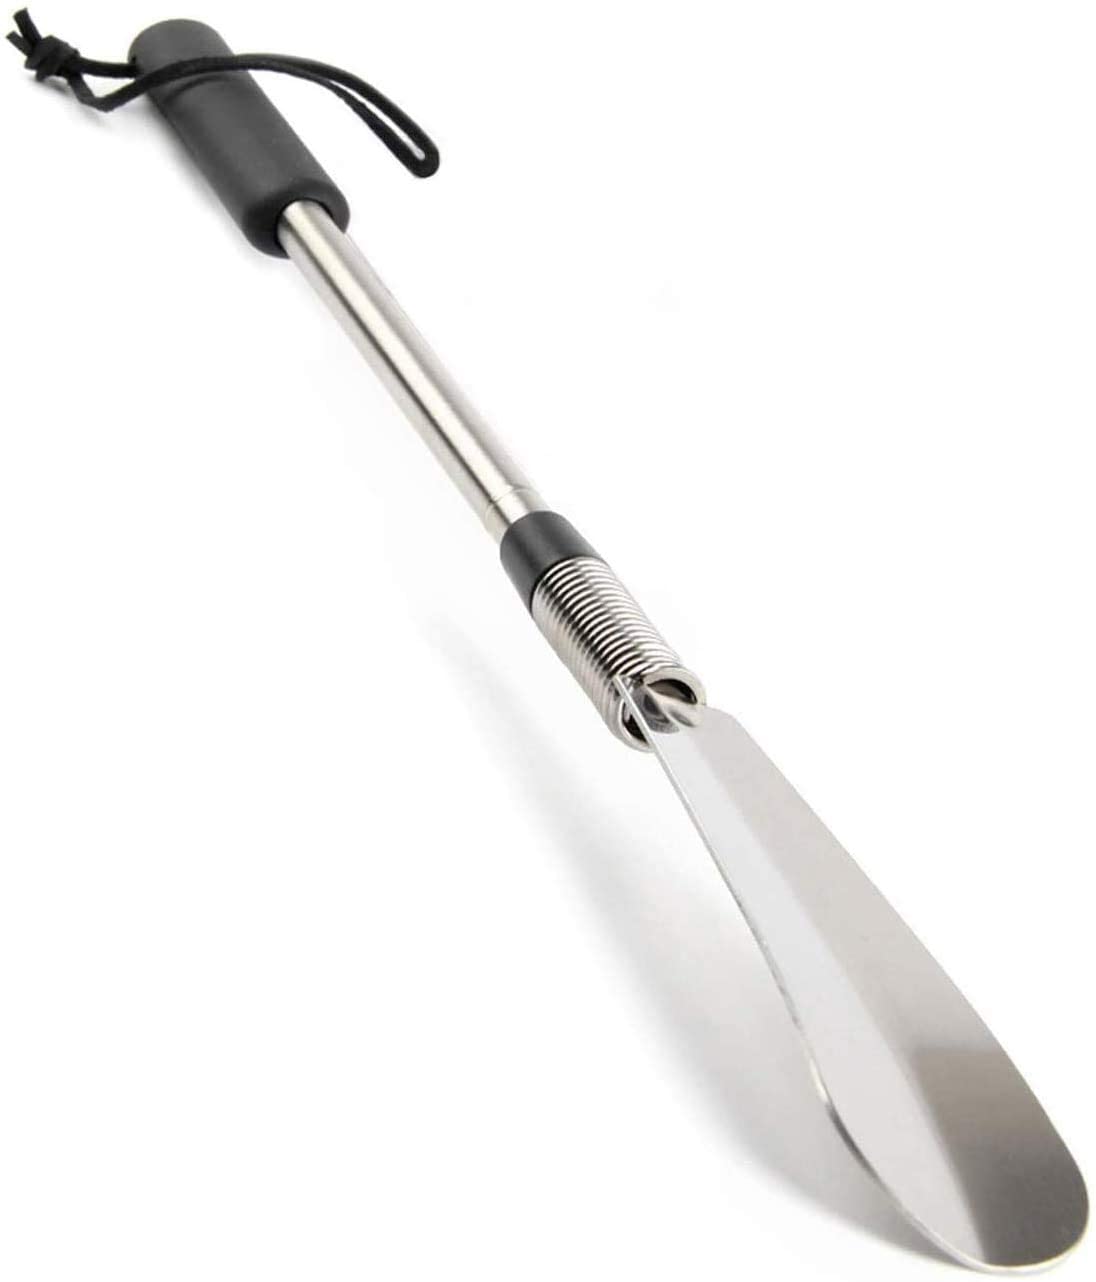 Premium Long Handled Shoe Horn with Telescopic Stainless Steel Expander, product demo